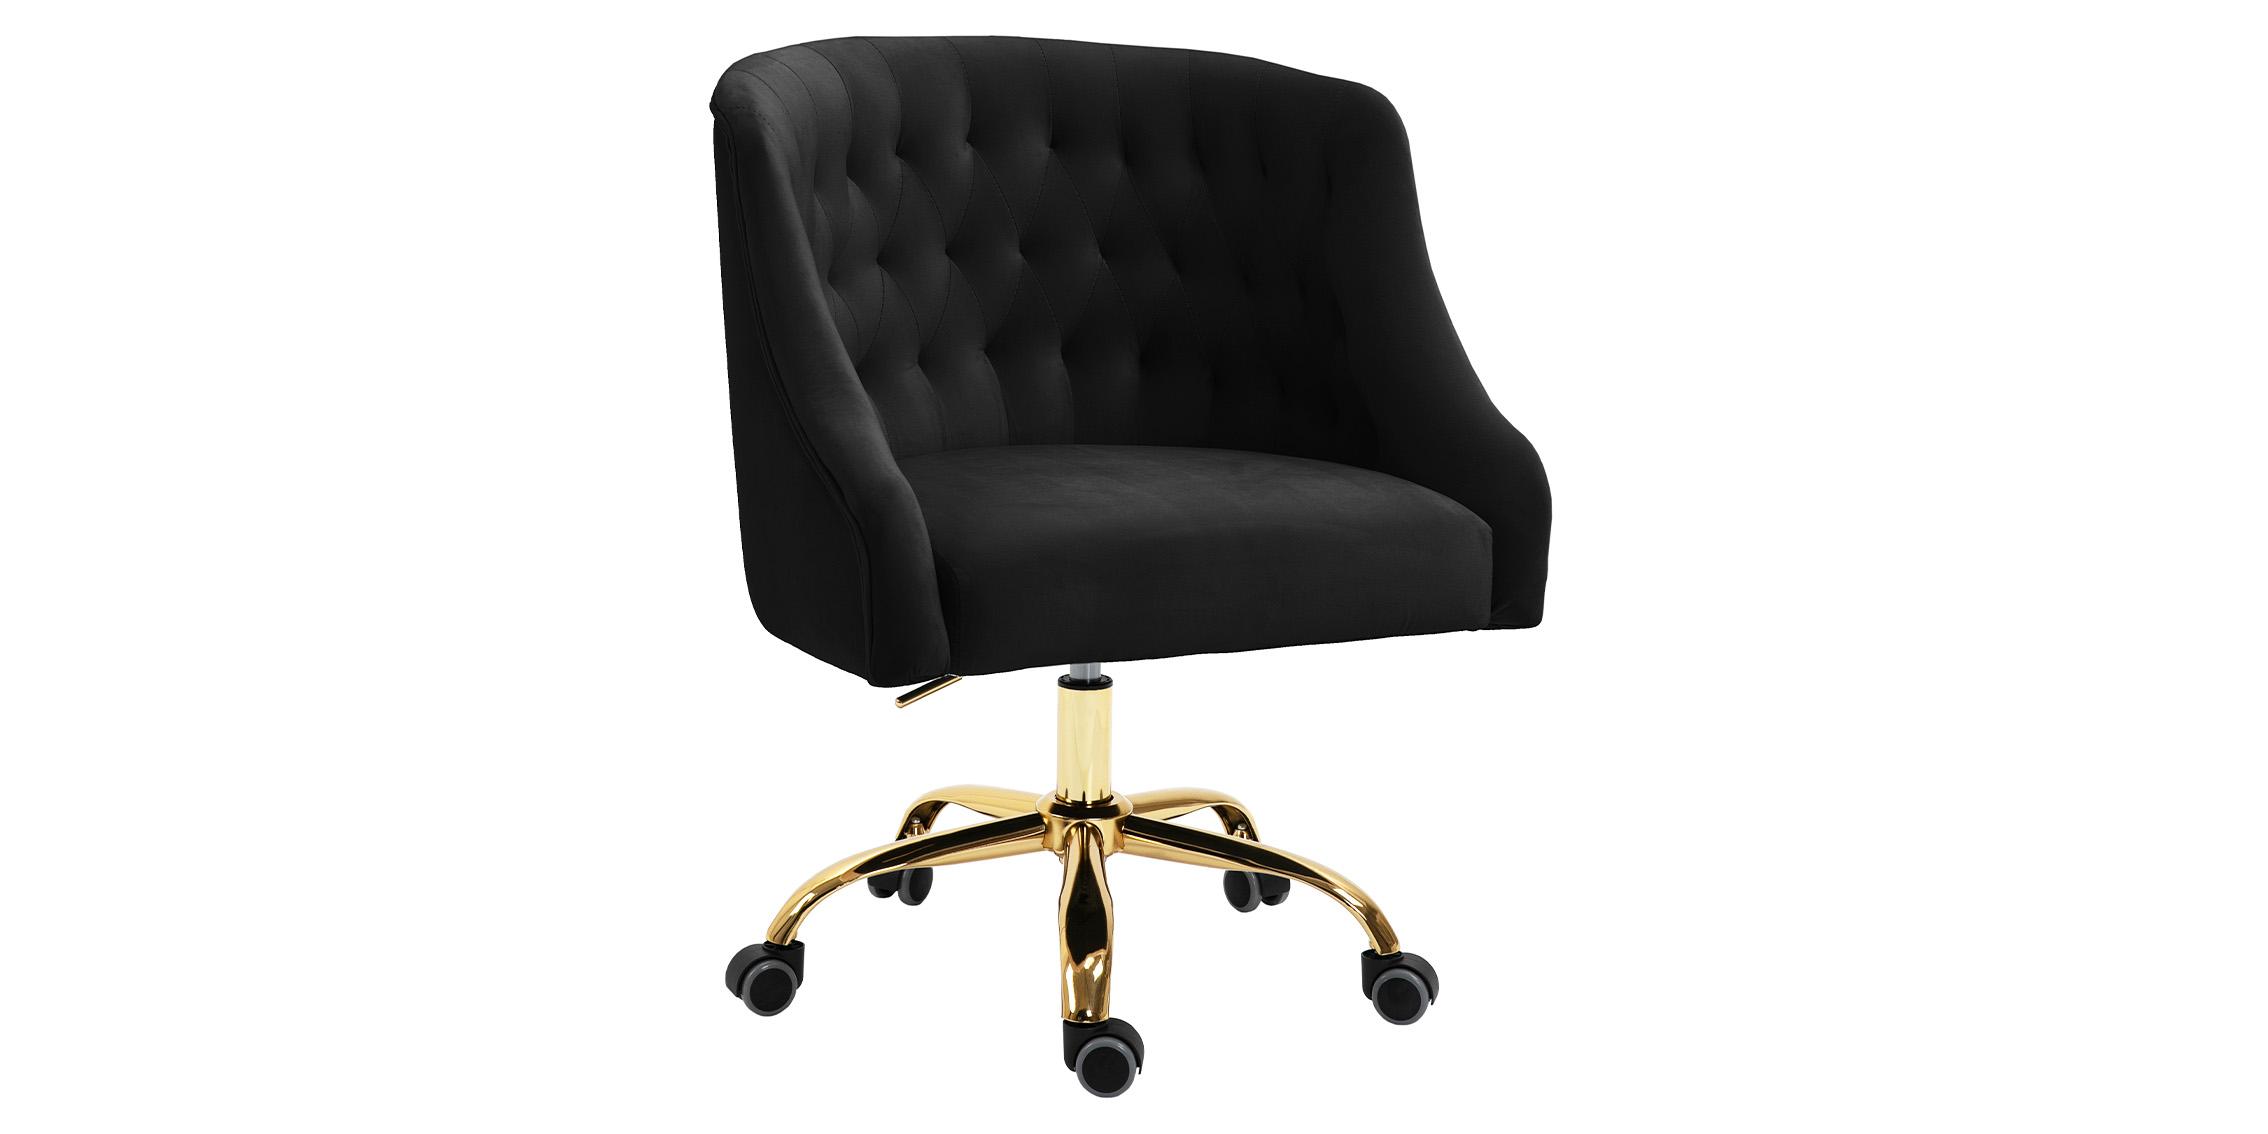 Contemporary, Modern Office Chair ARDEN 161Black 161Black in Black Fabric